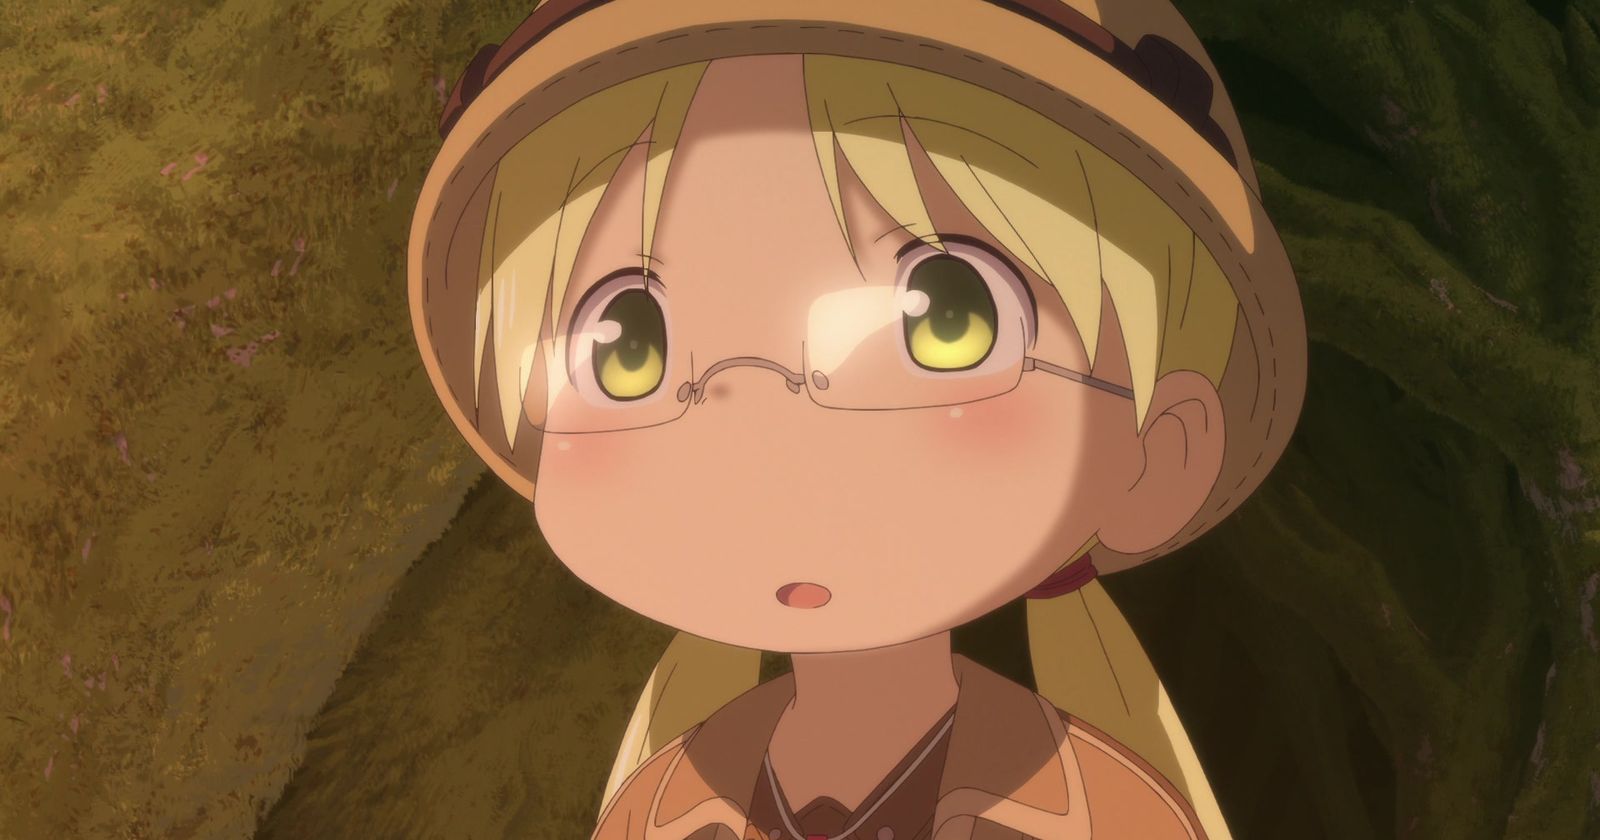 Made in Abyss: Wandering Twilight streaming